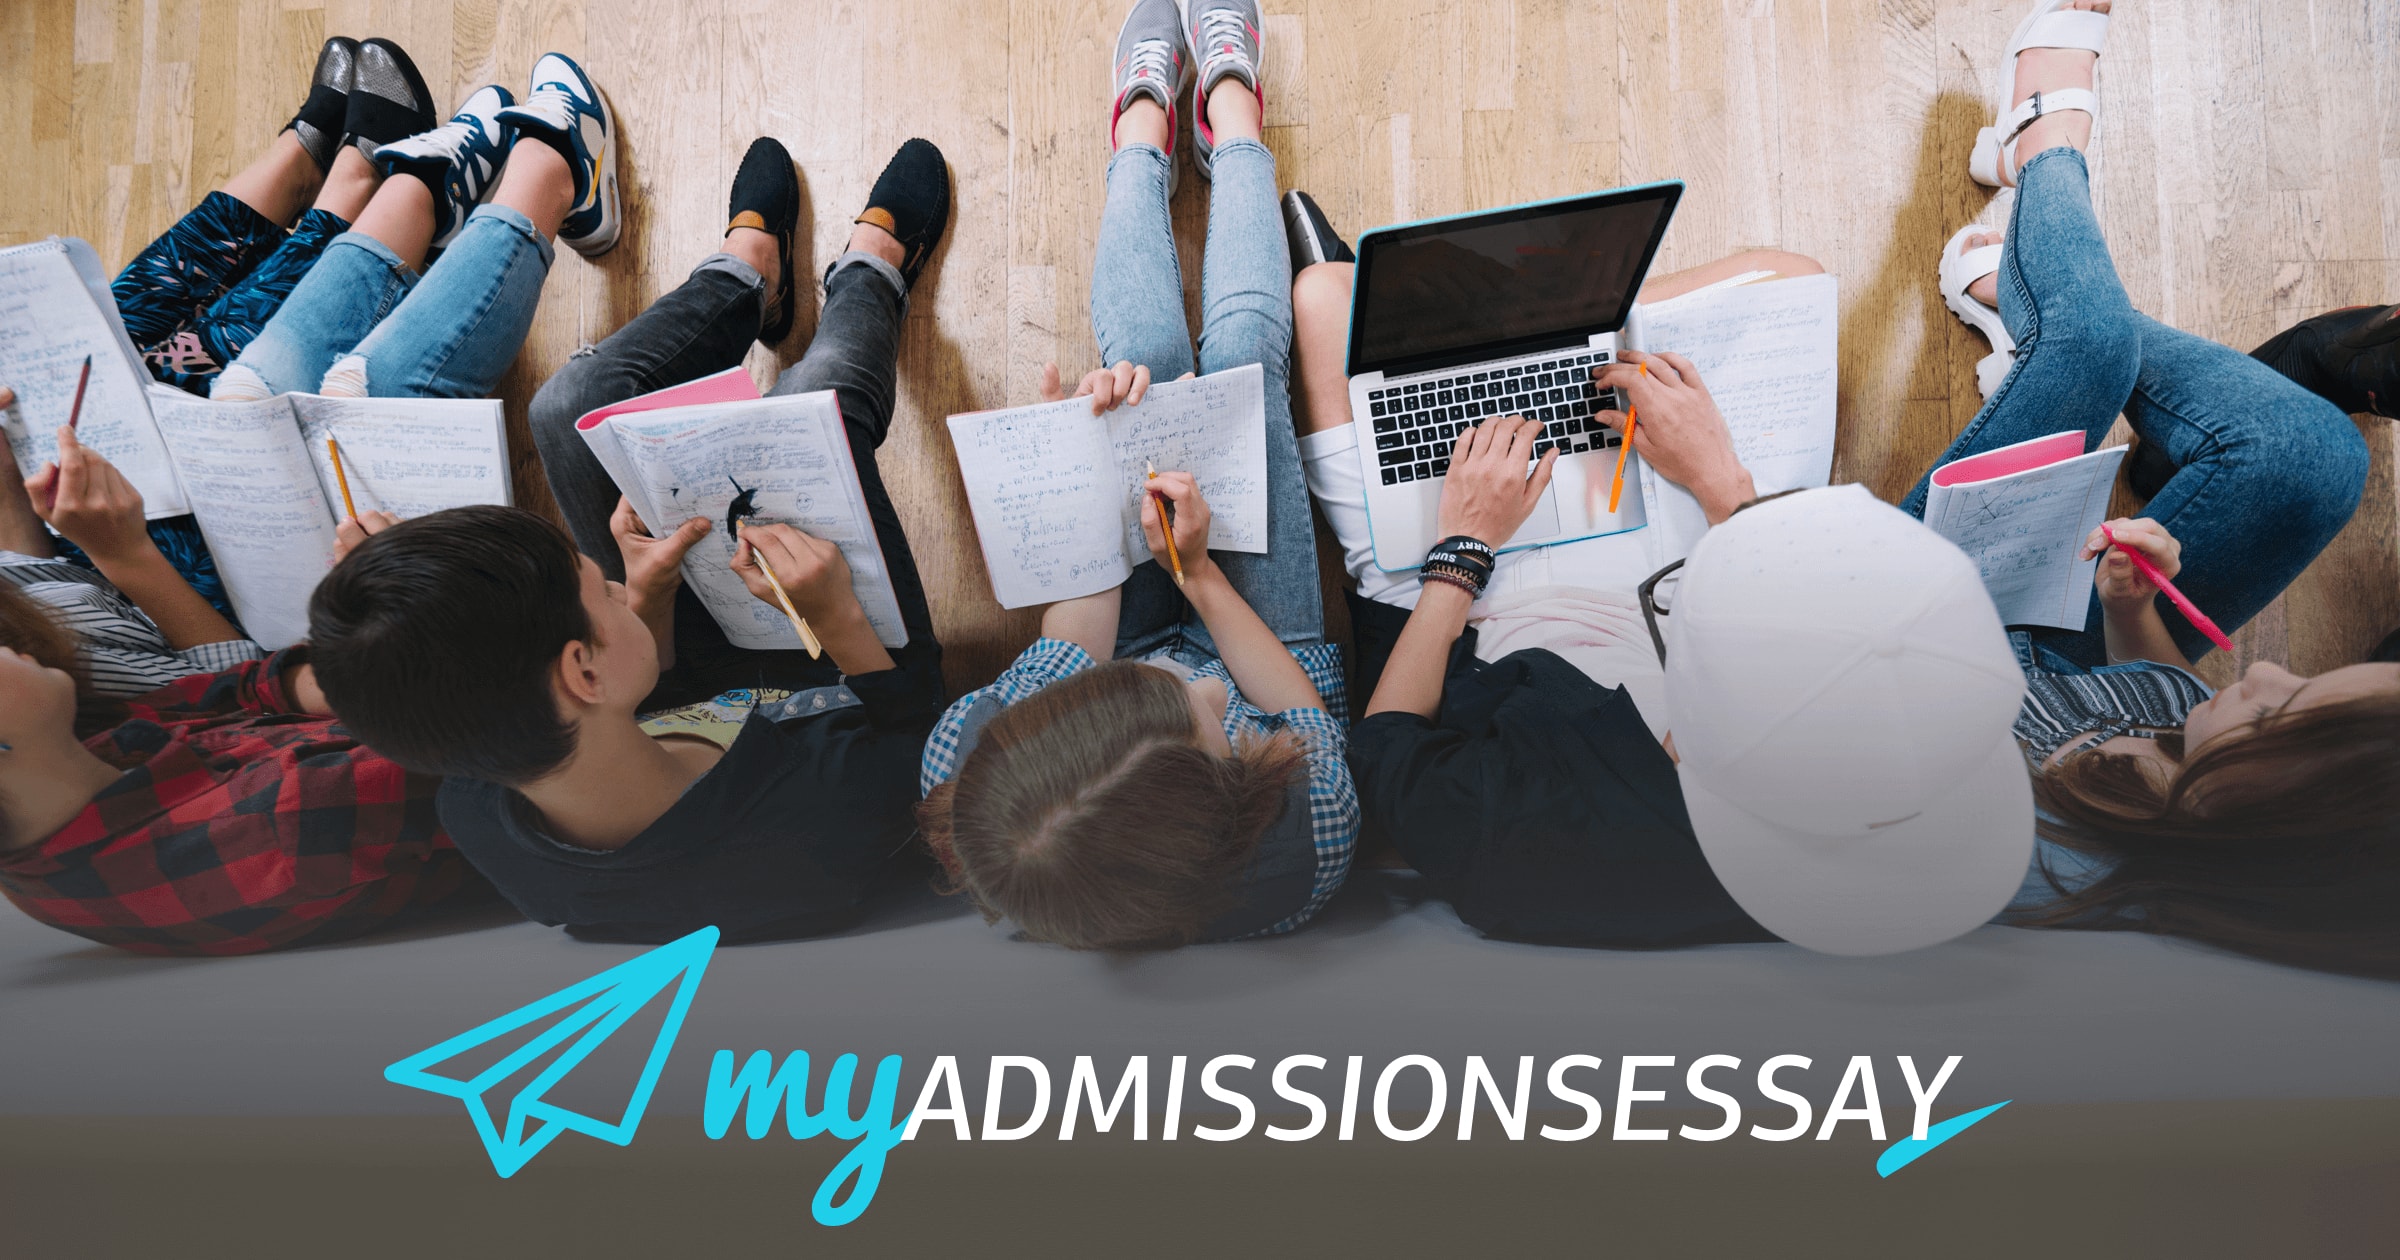 Admission essay editing services yahoo answers